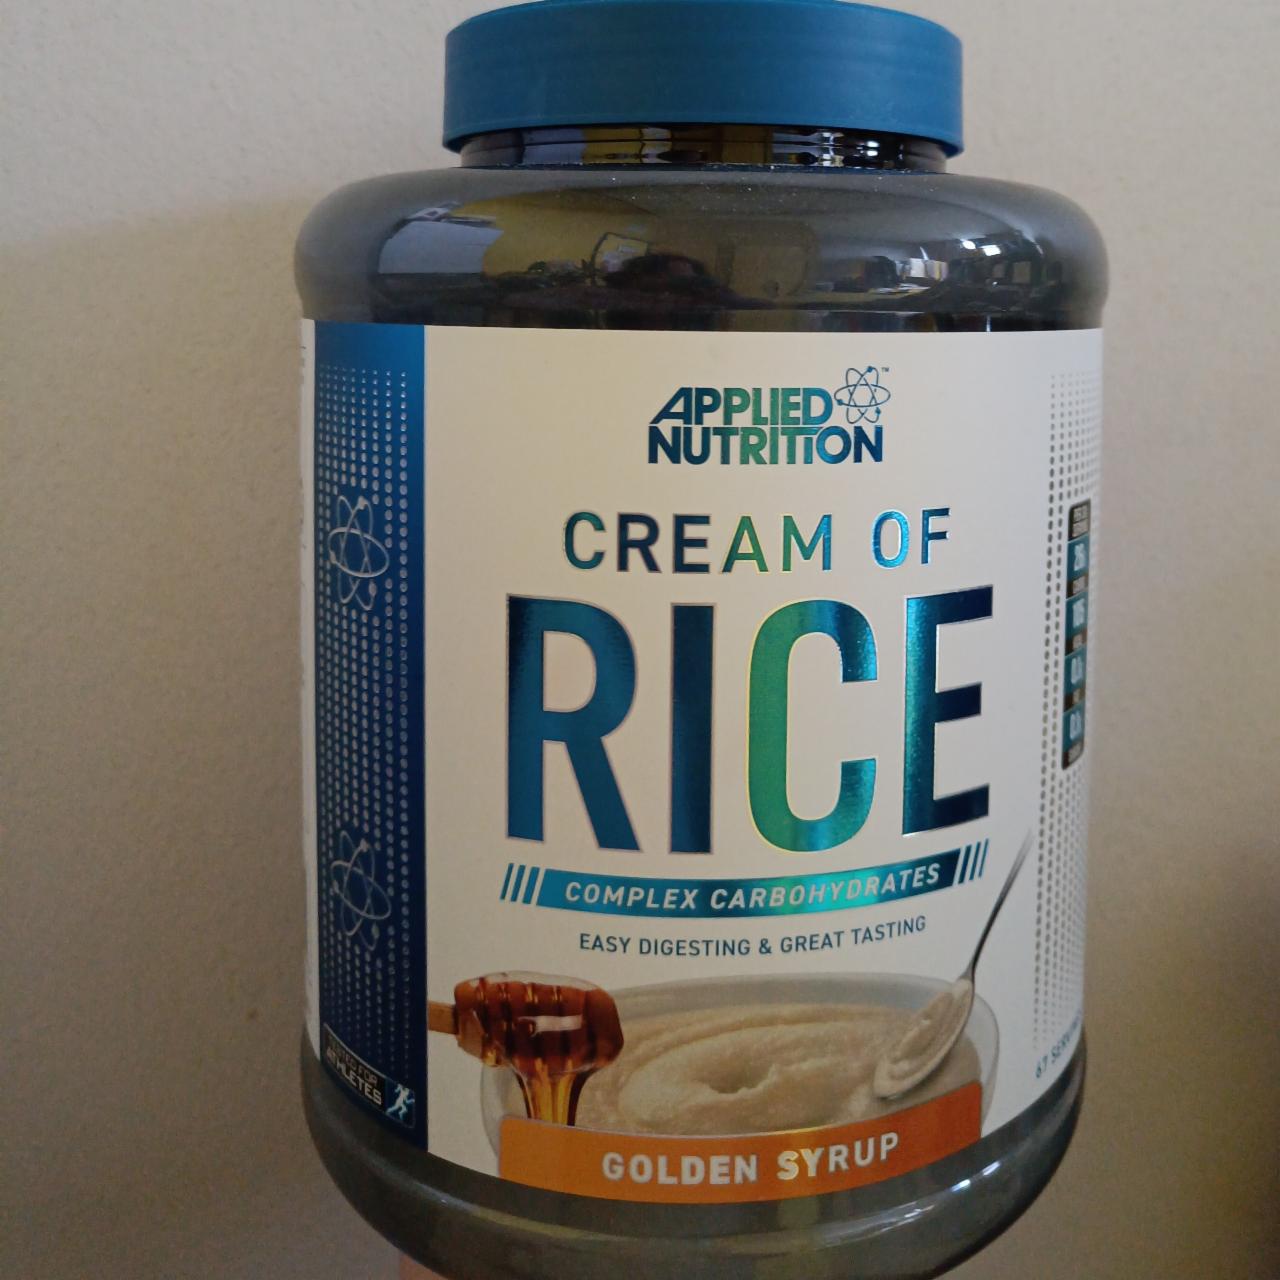 Fotografie - Cream of rice golden syrup Applied nutrition